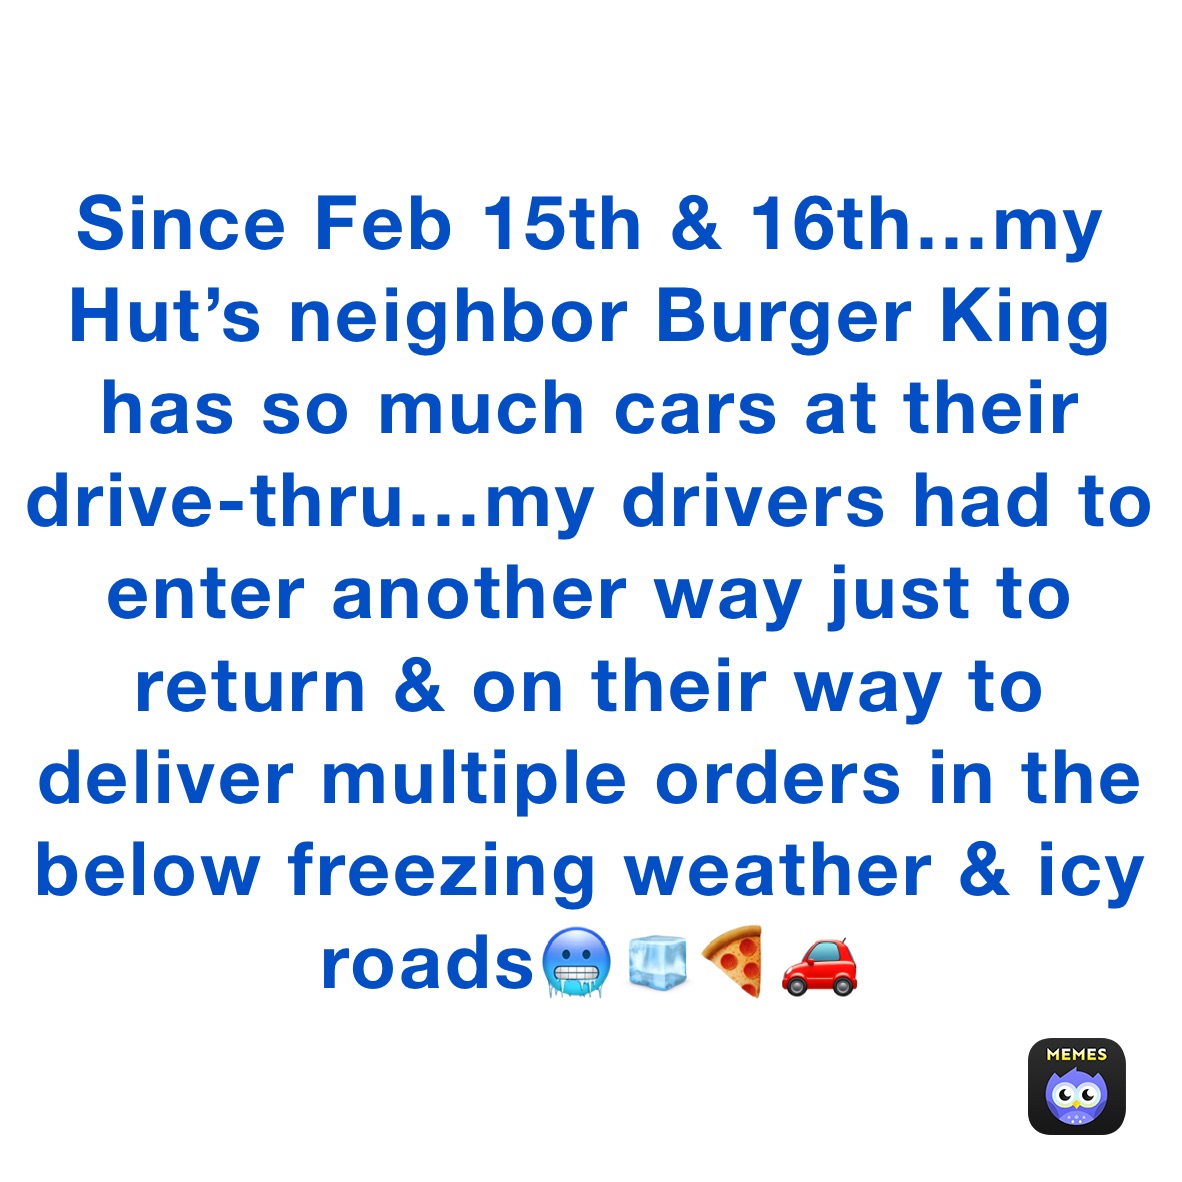 Since Feb 15th & 16th…my Hut’s neighbor Burger King has so much cars at their drive-thru…my drivers had to enter another way just to return & on their way to deliver multiple orders in the below freezing weather & icy roads🥶🧊🍕🚗